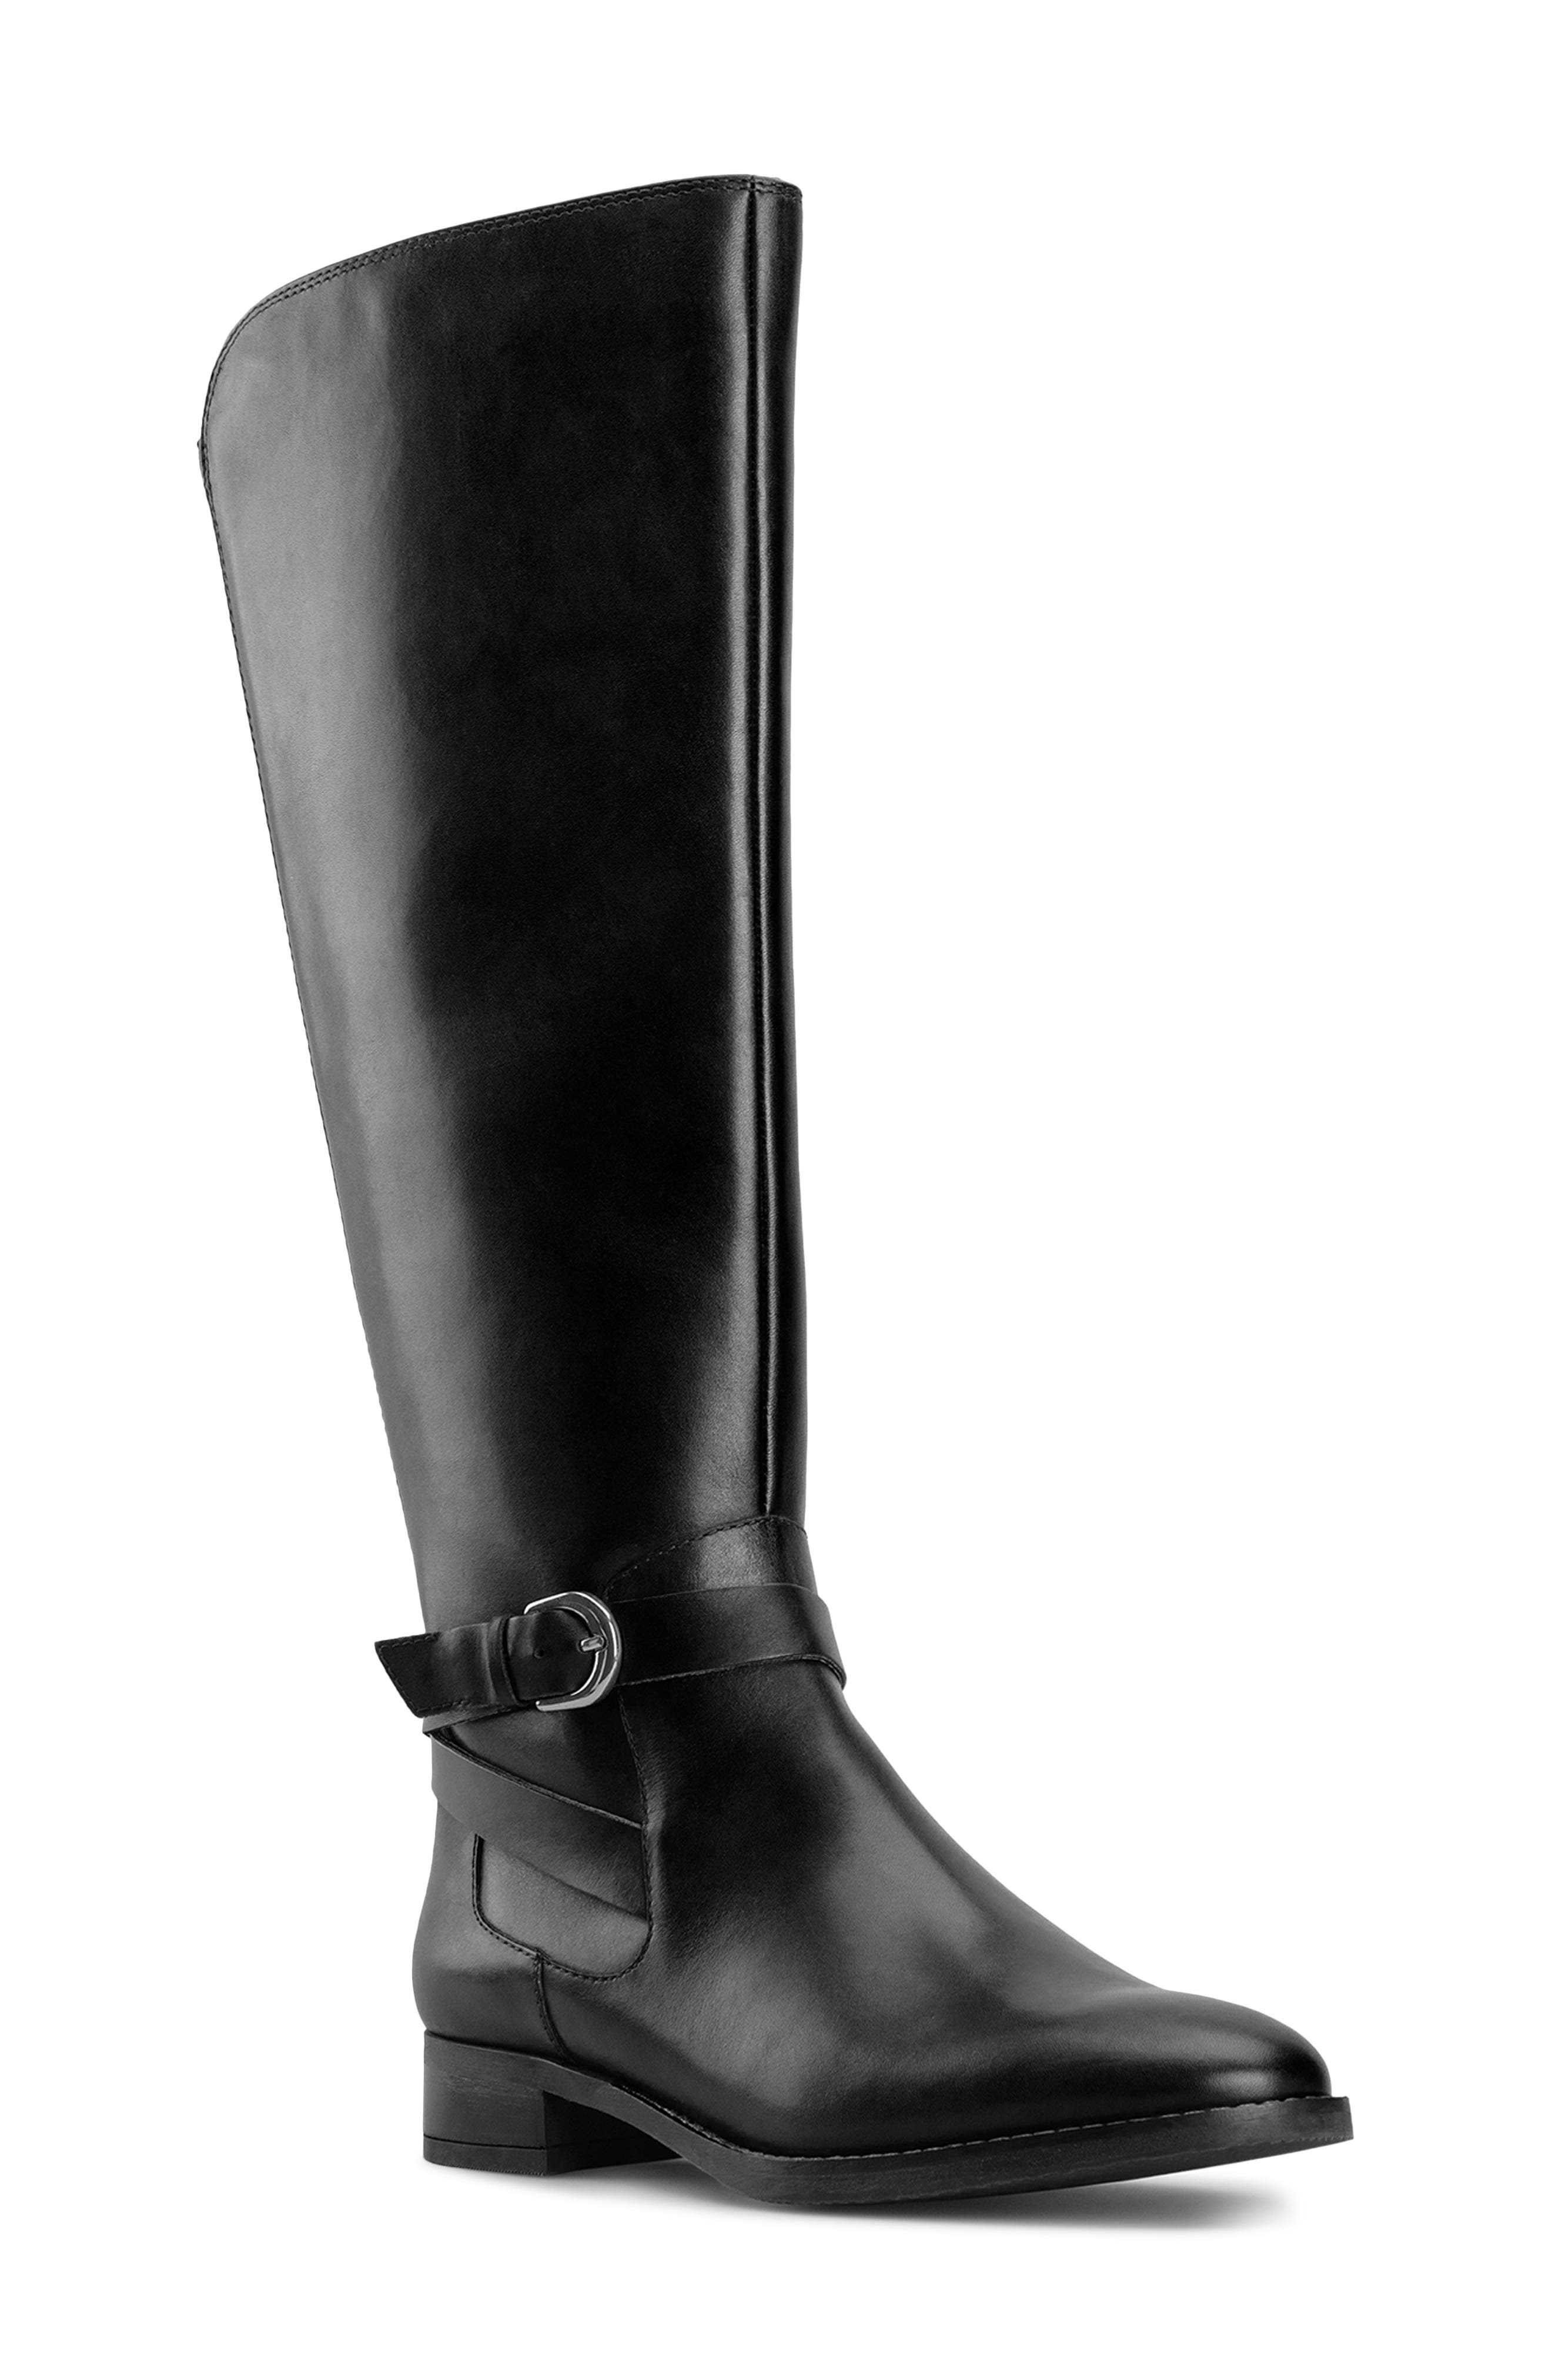 clarks equestrian boots